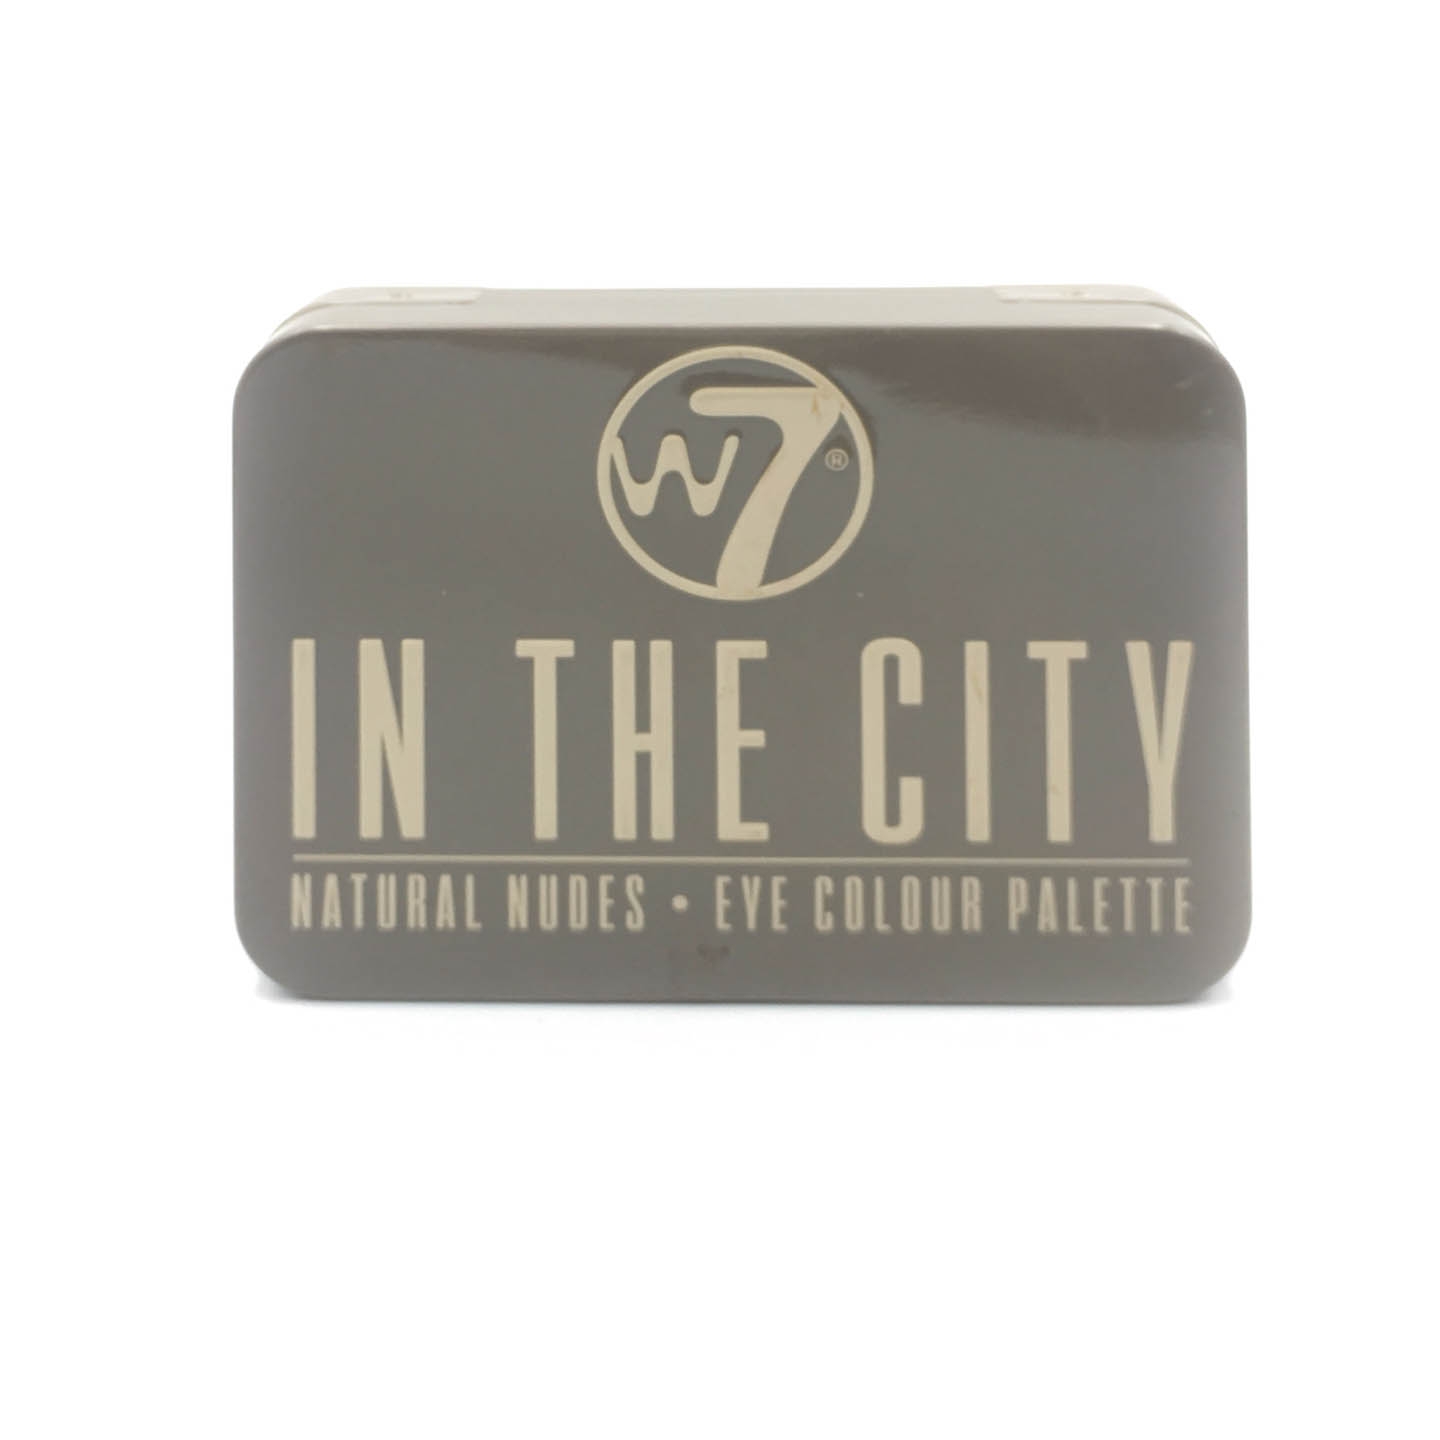 w7 In The City Natural Nute Eye Colour Sets and Palette